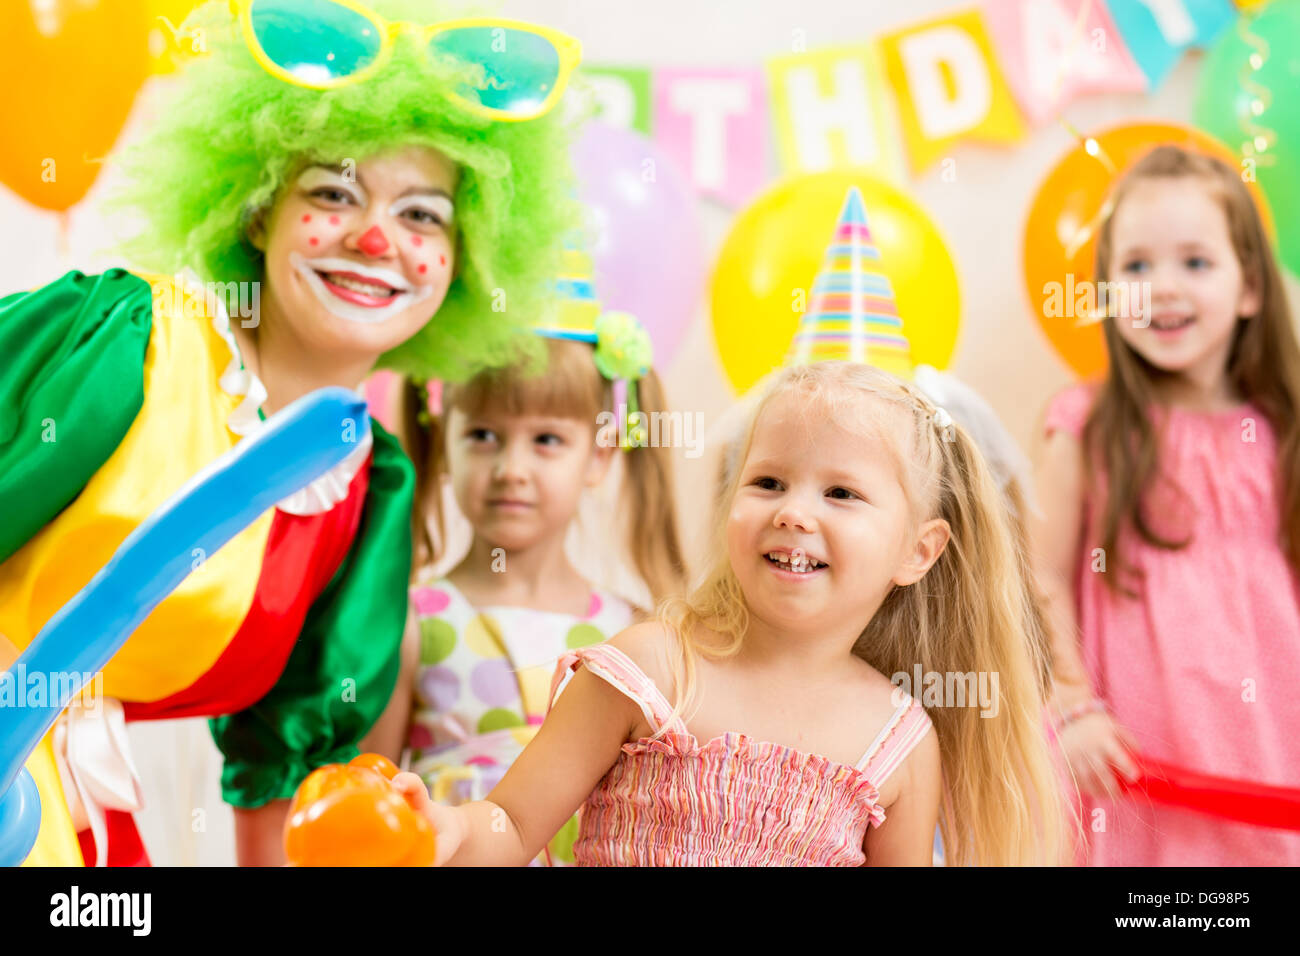 kids group and clown on birthday party Stock Photo